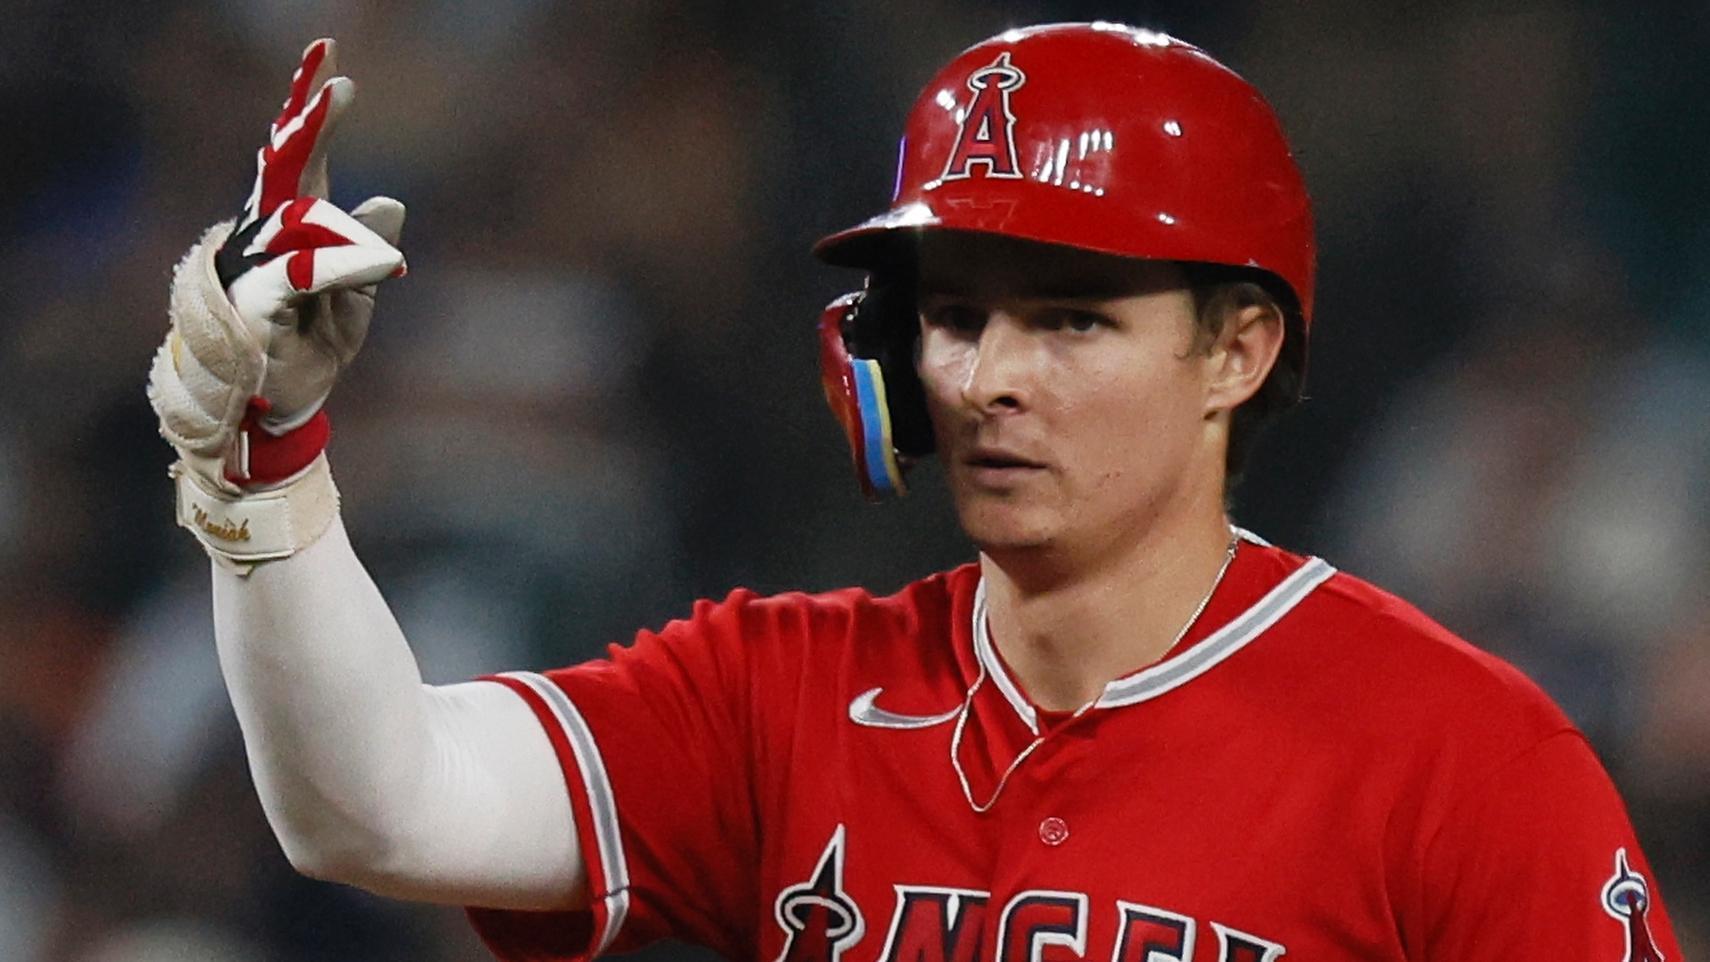 Angels: Mickey Moniak on Potentially Getting World Series Ring